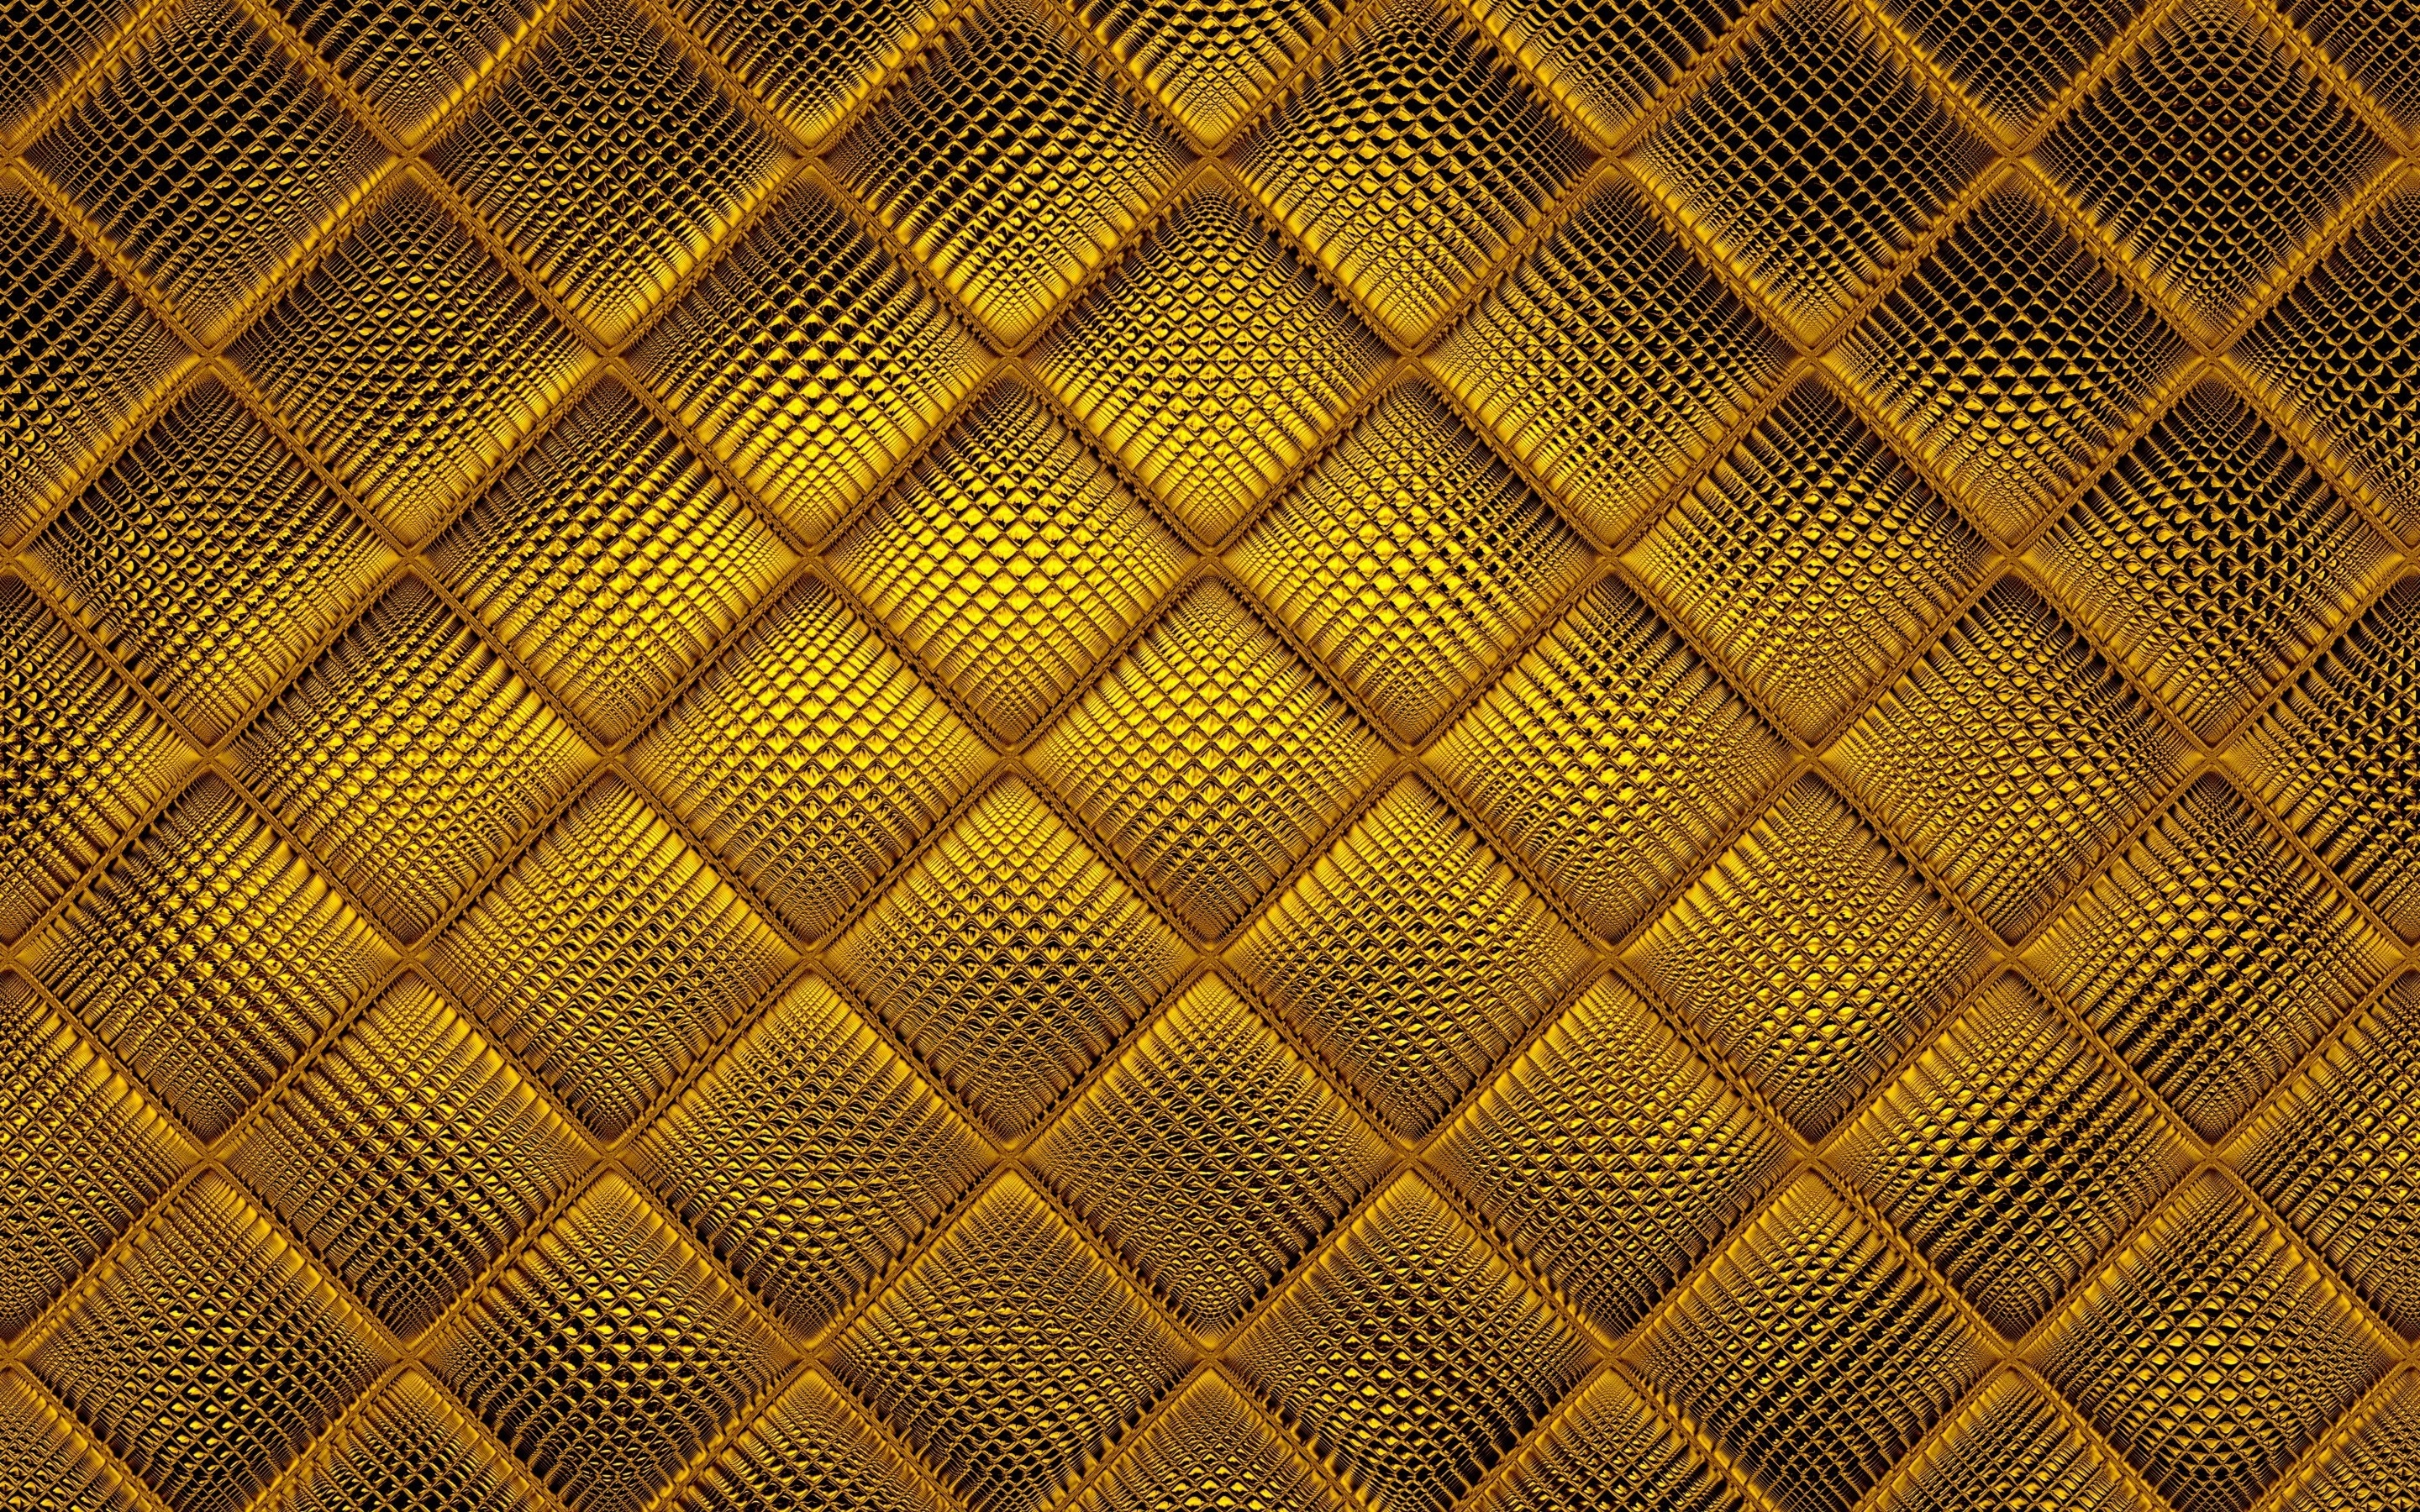 Gold Abstract Texture for 2880 x 1800 Retina Display resolution